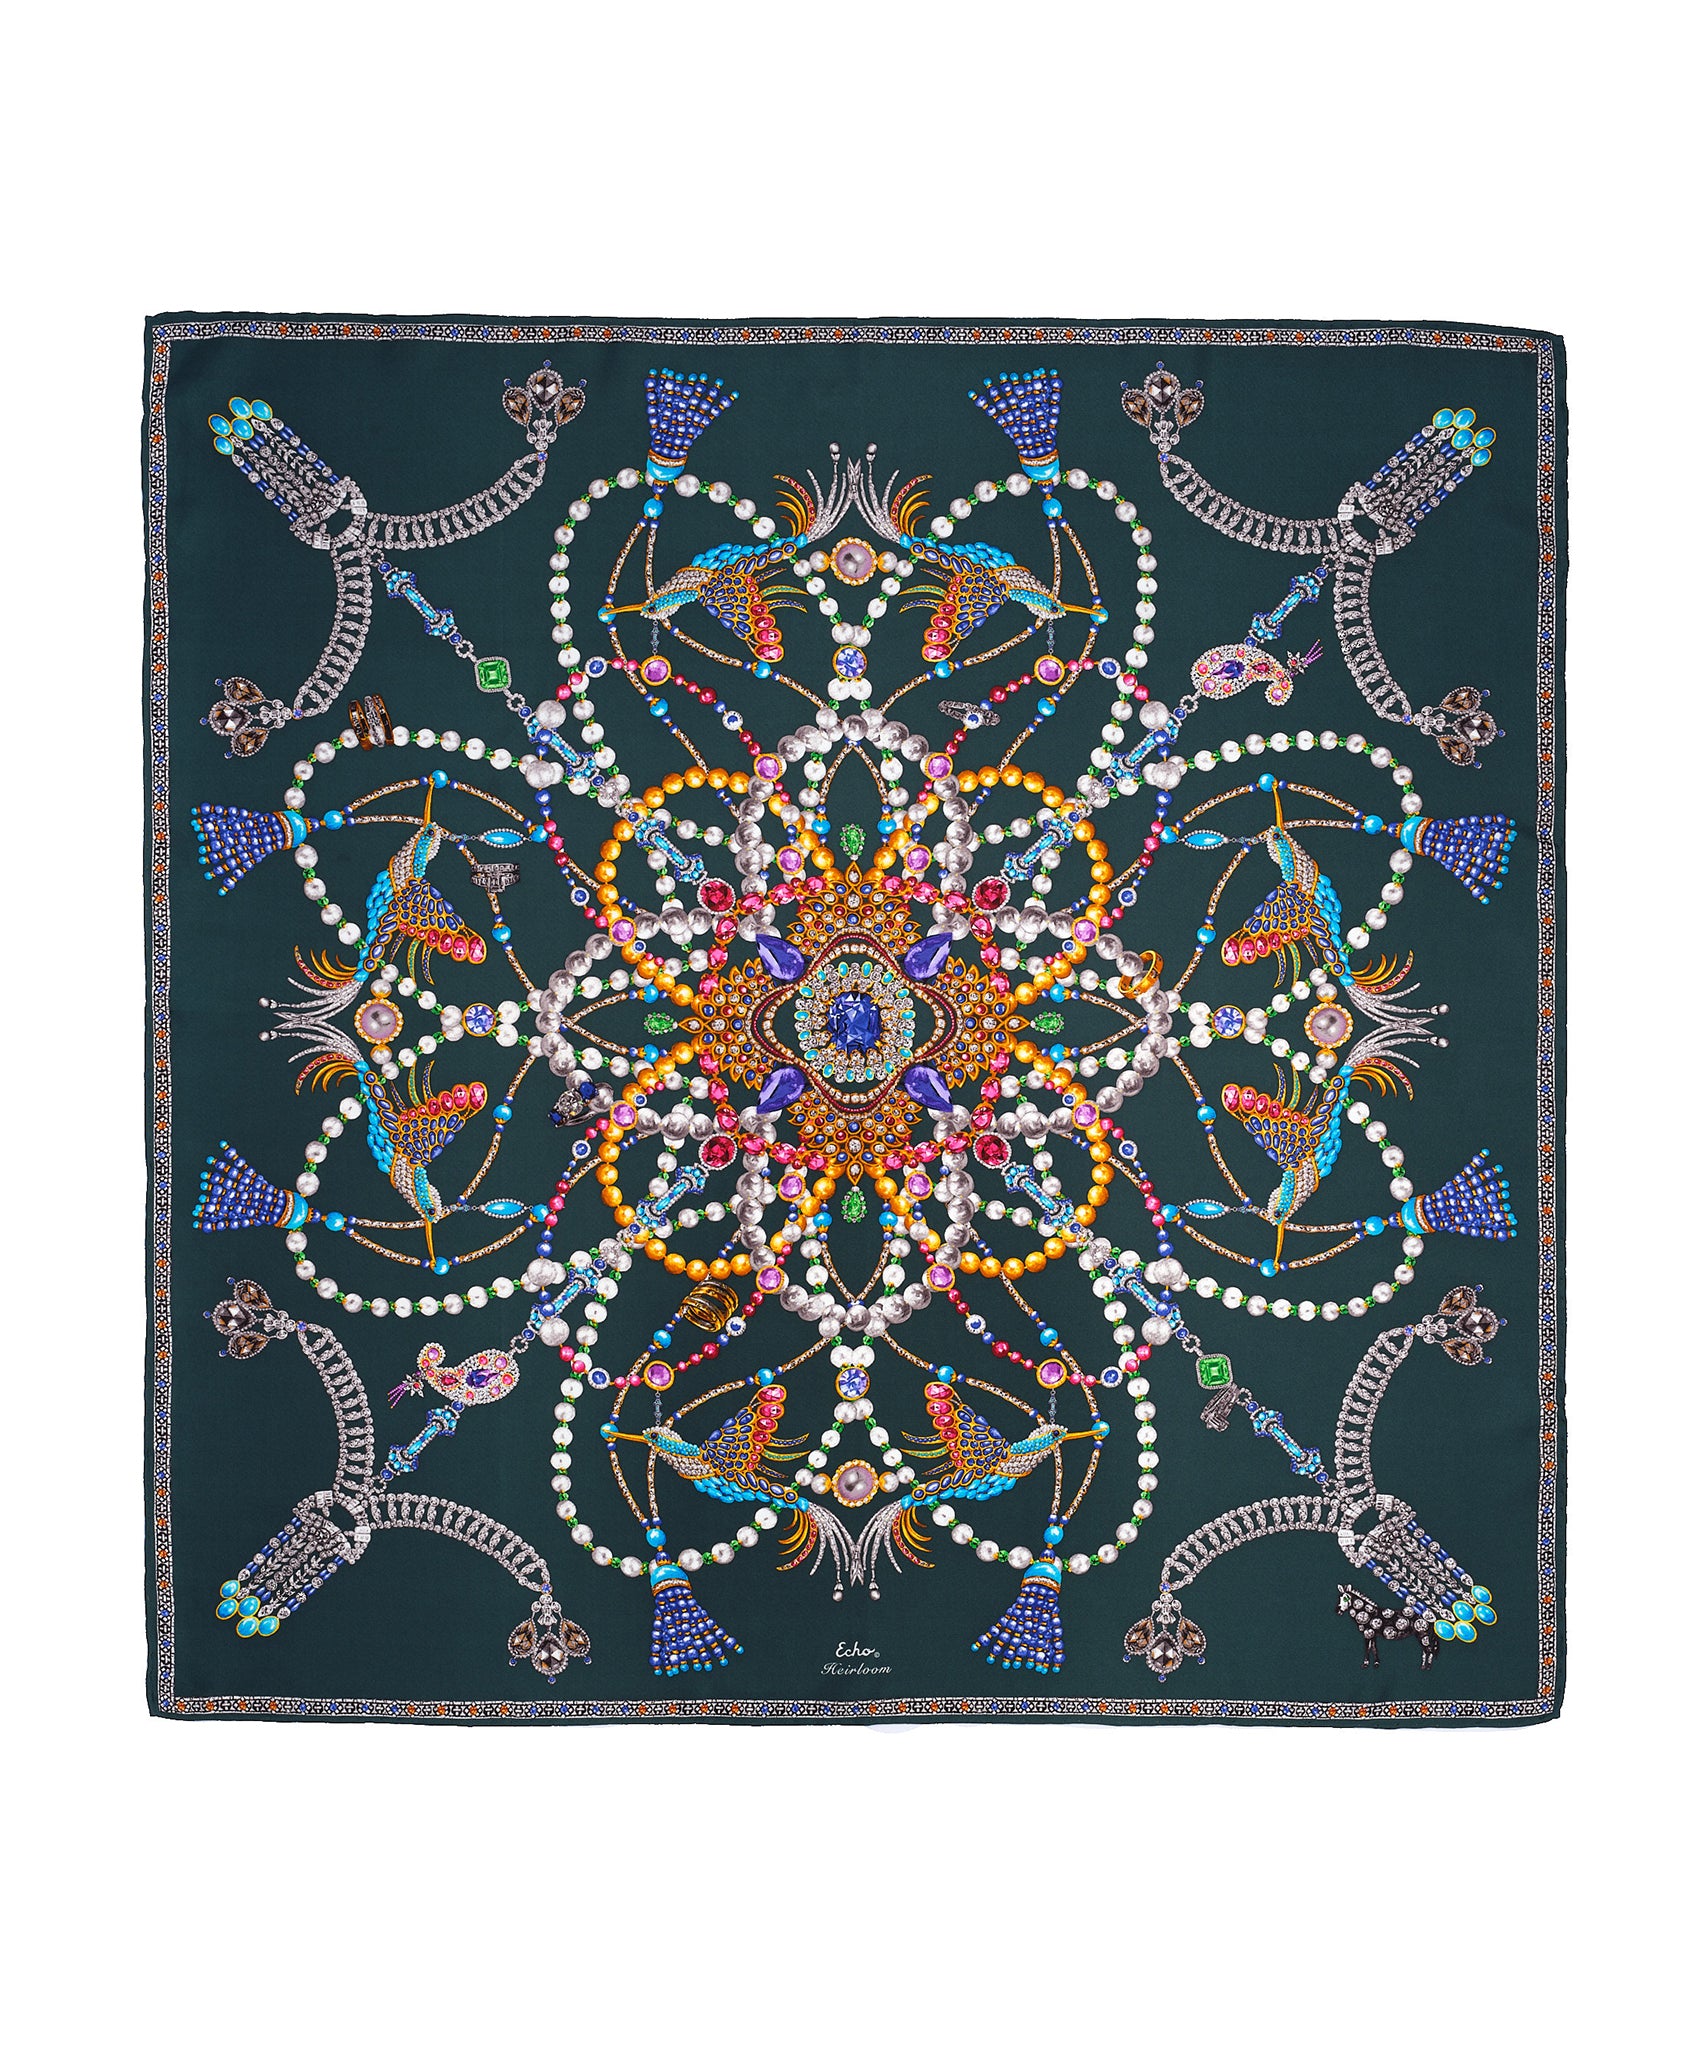 Heirloom Silk Square in color Ivy